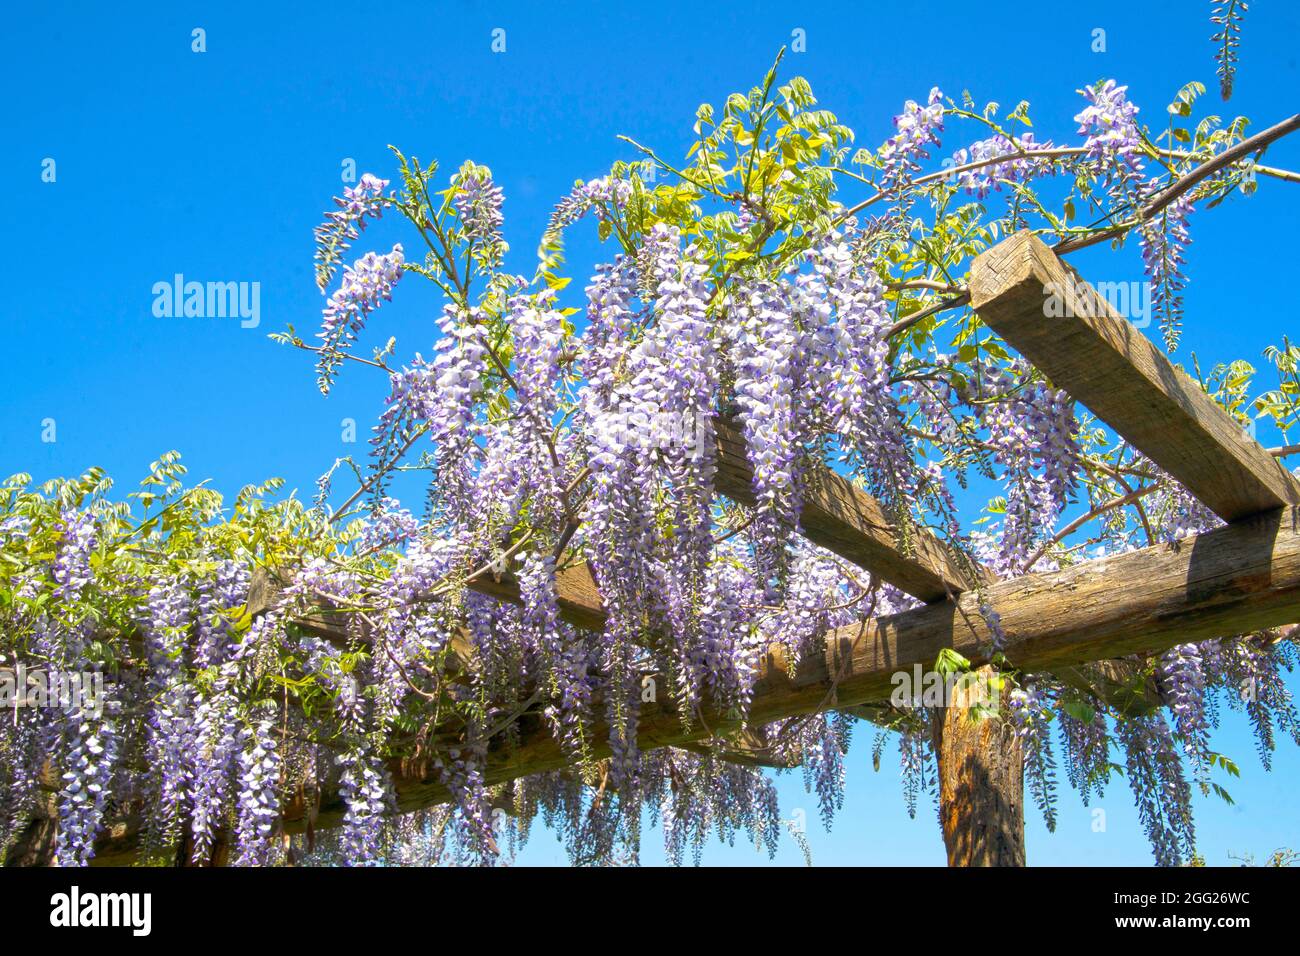 Abundant flowering wisteria in spring over a wooden support Stock Photo